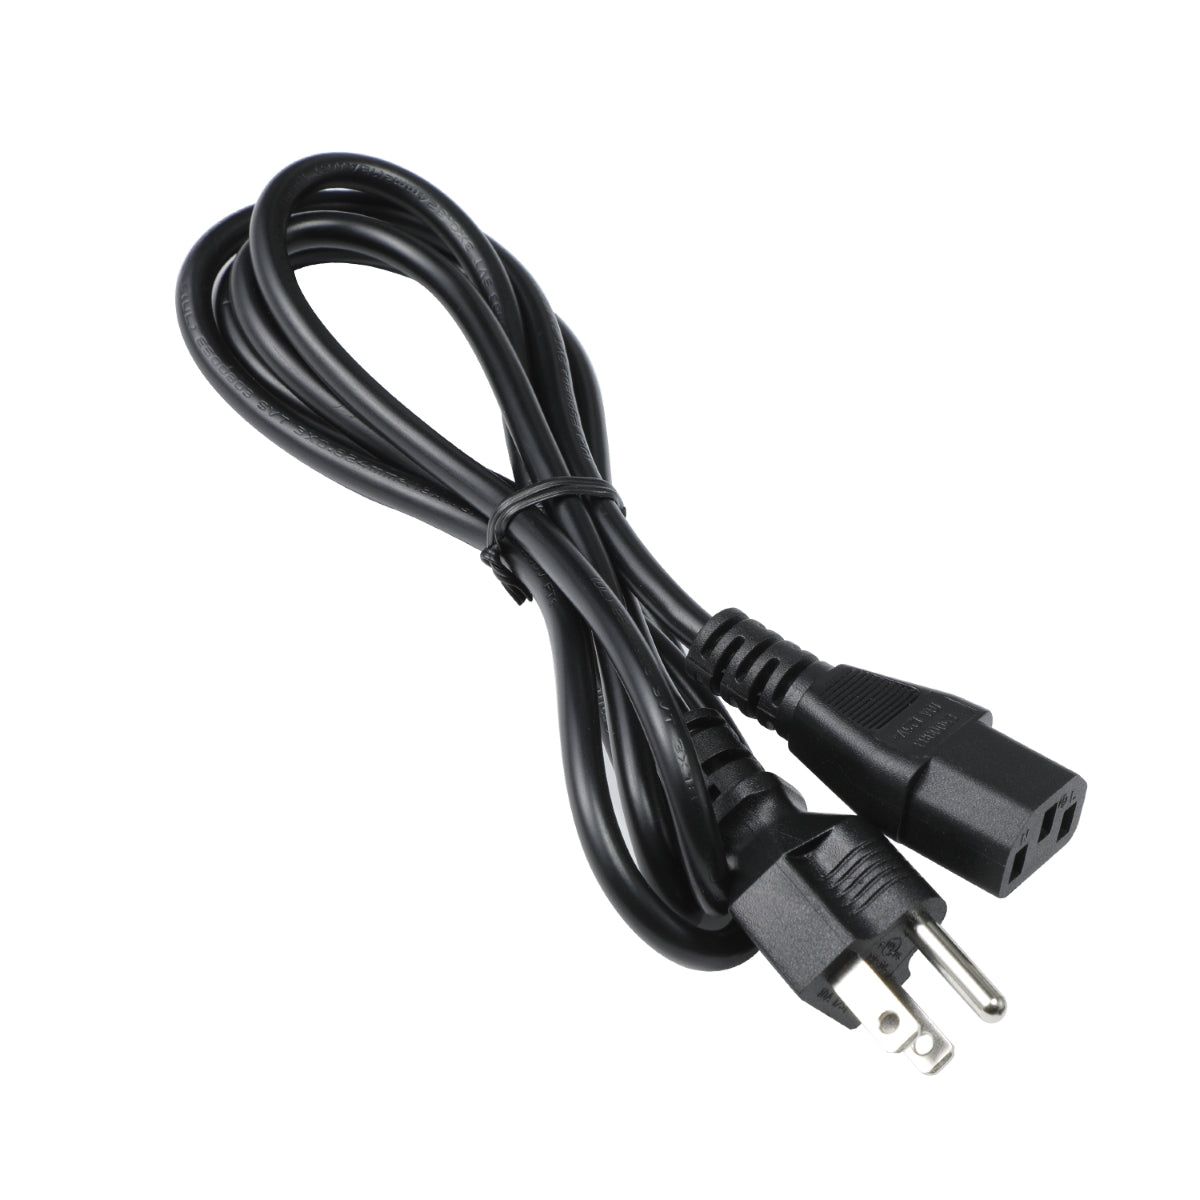 Power Cord for HP Pavilion 27wm LED Monitor